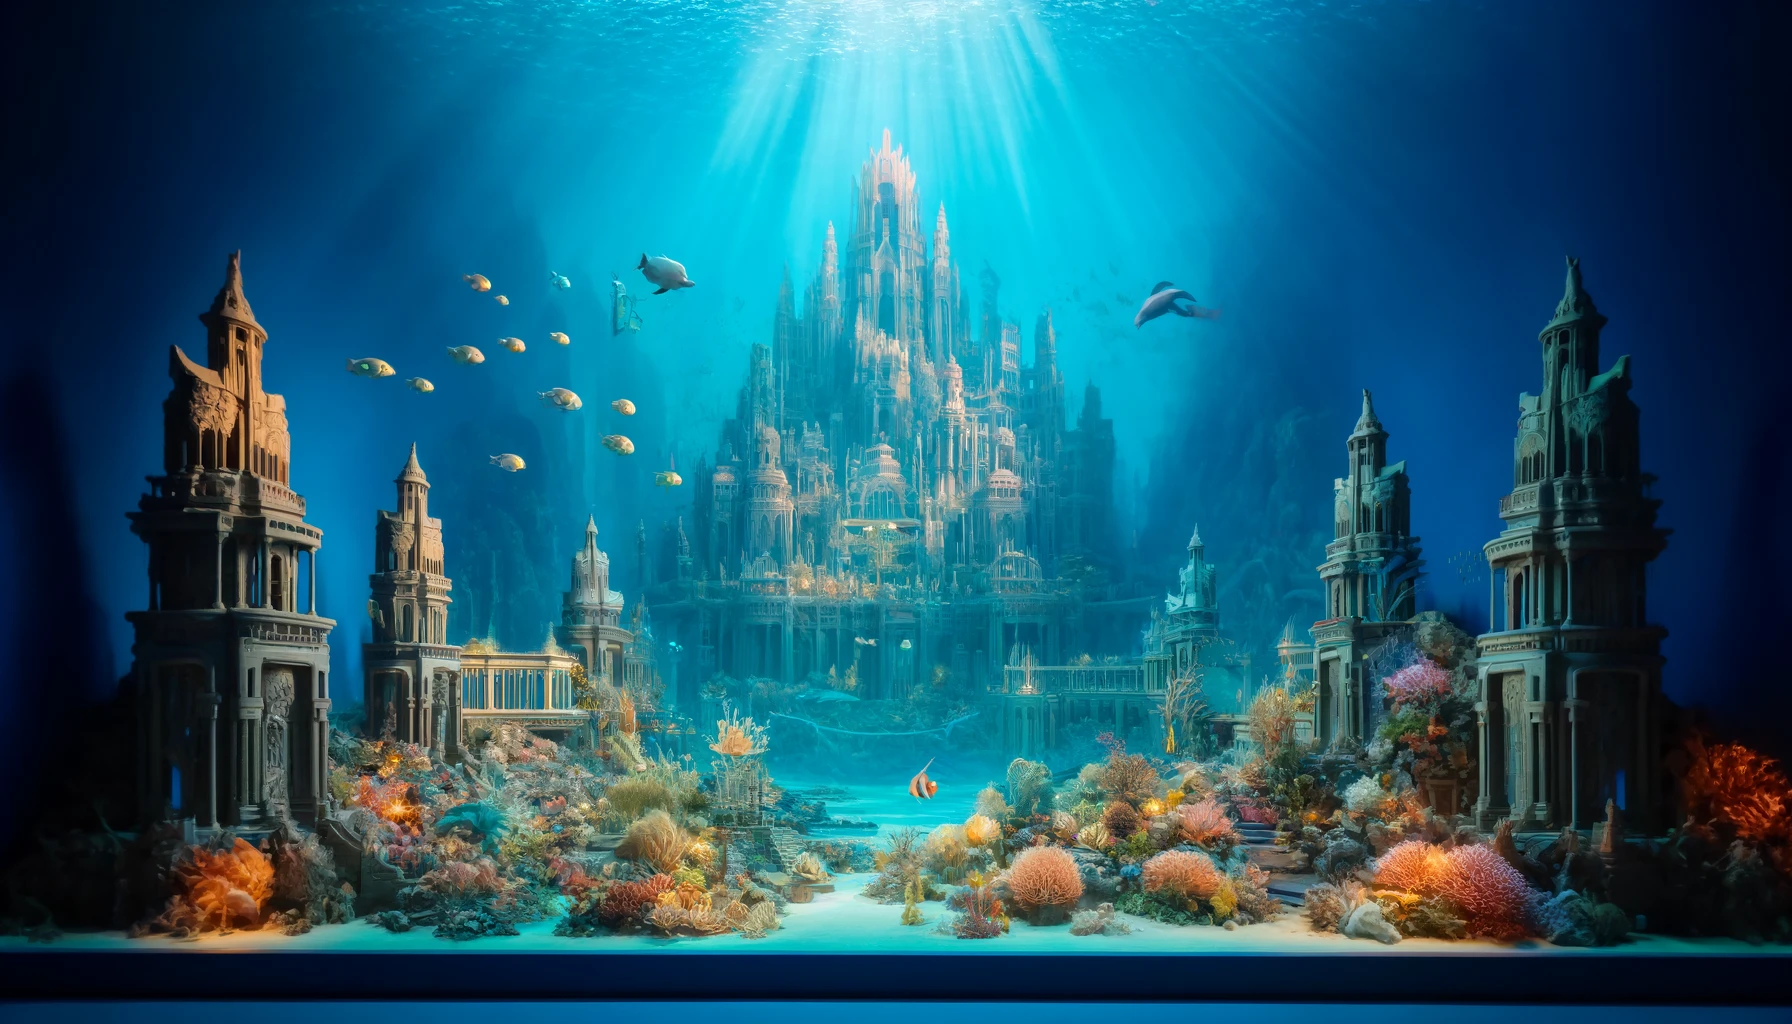  A breathtaking underwater city of Atlantis with intricate towers, vibrant coral reefs, and exotic fish swimming in a clear blue ocean. The scene captures the grandeur and mystique of an advanced civilization beneath the waves, resembling a still from a  fantasy film.